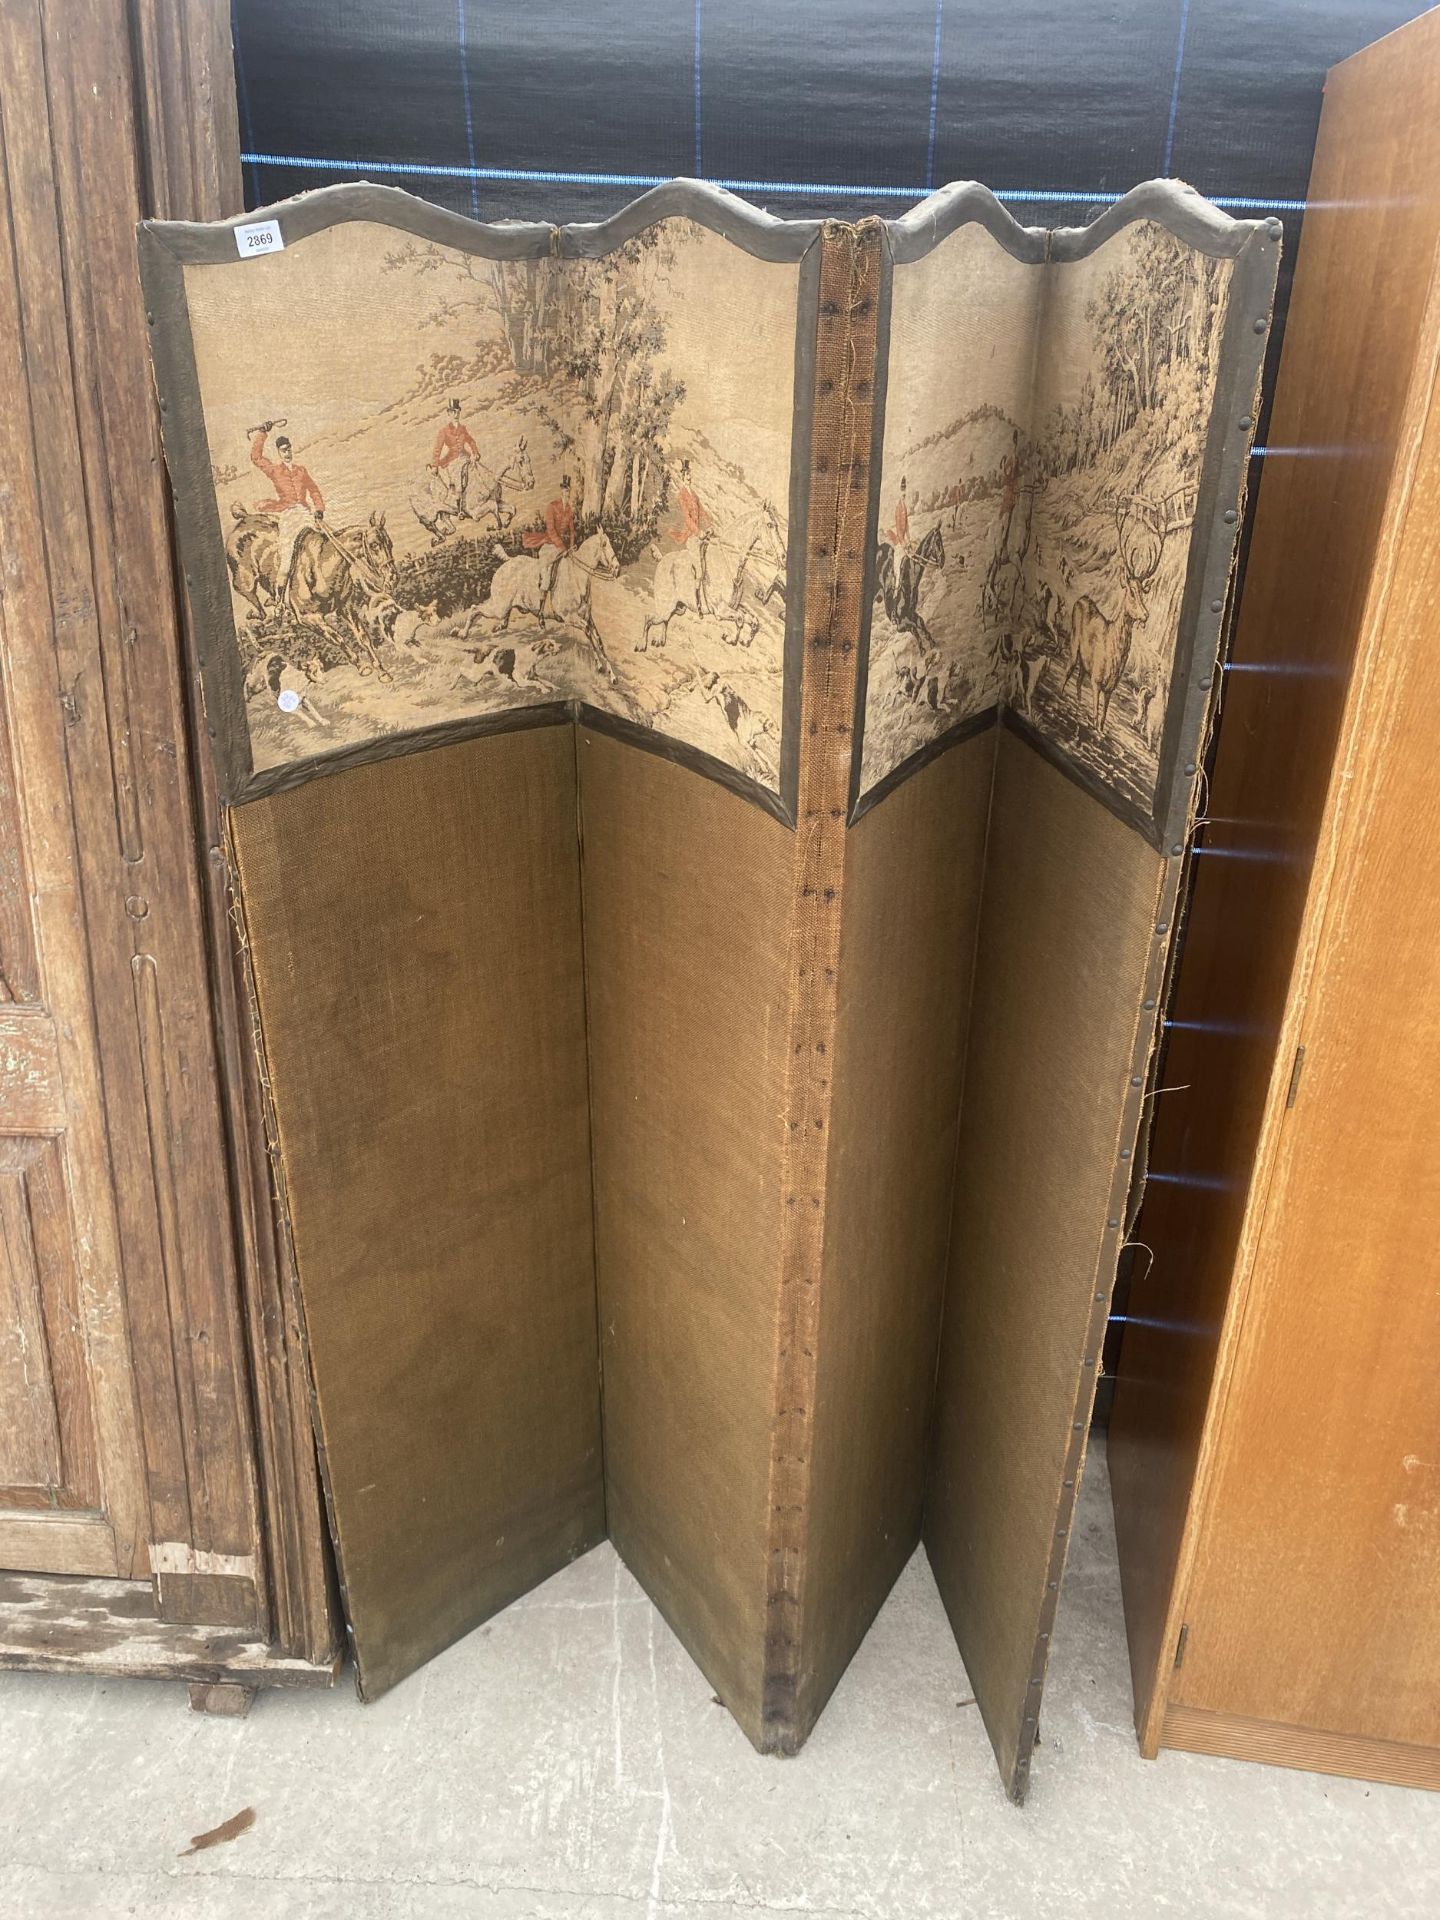 A FOUR DIVISION SCREEN DECORATED WITH HUNTING SCENES